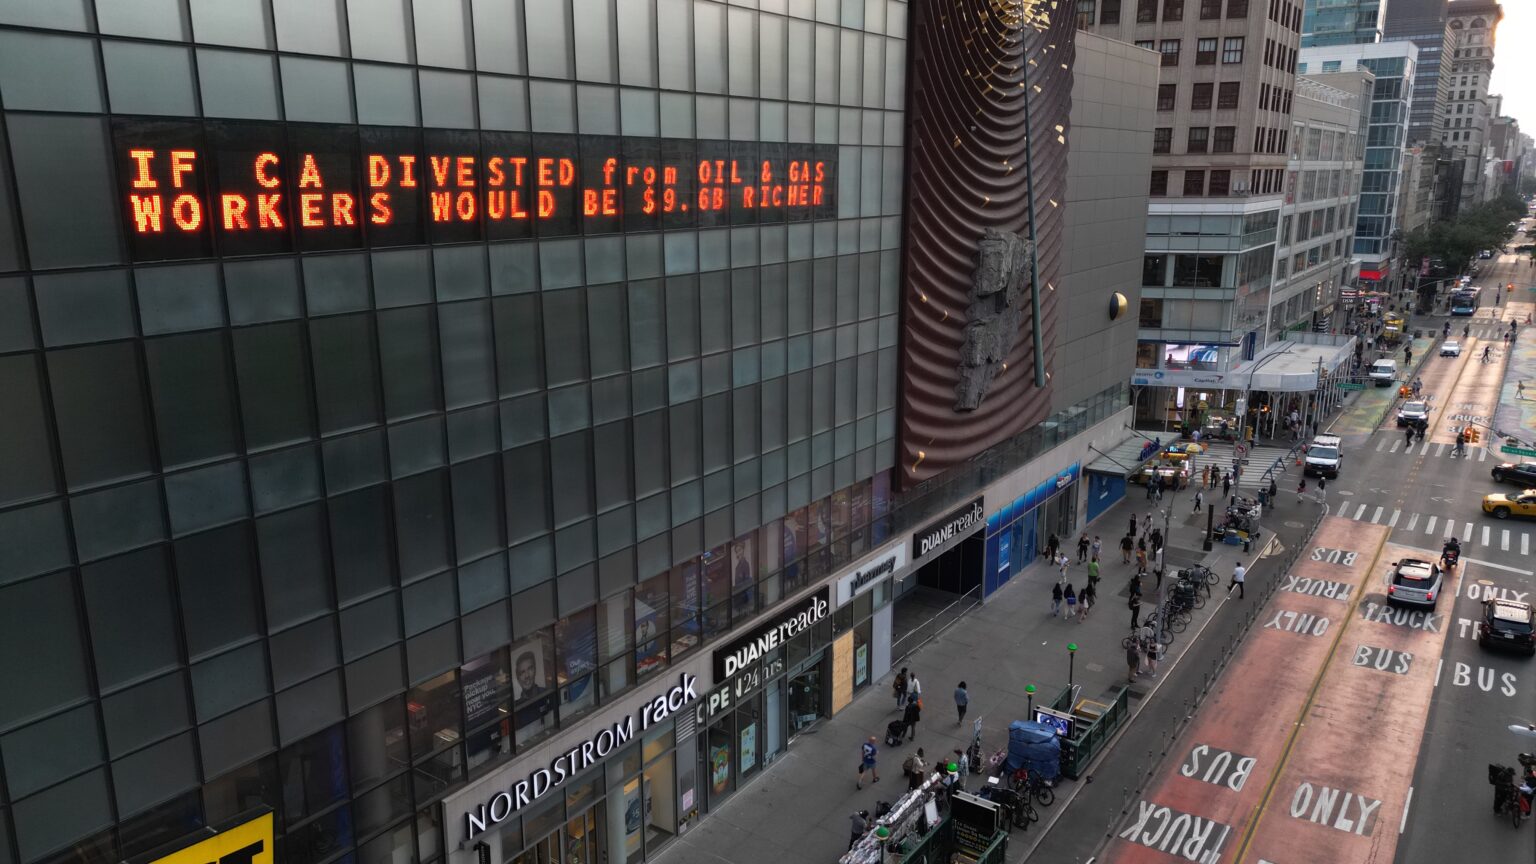 Climate clock ticker on side of a NYC skyscraper lit up with the message "if ca divested from oil and gas workers would be $9.6 billion richer"